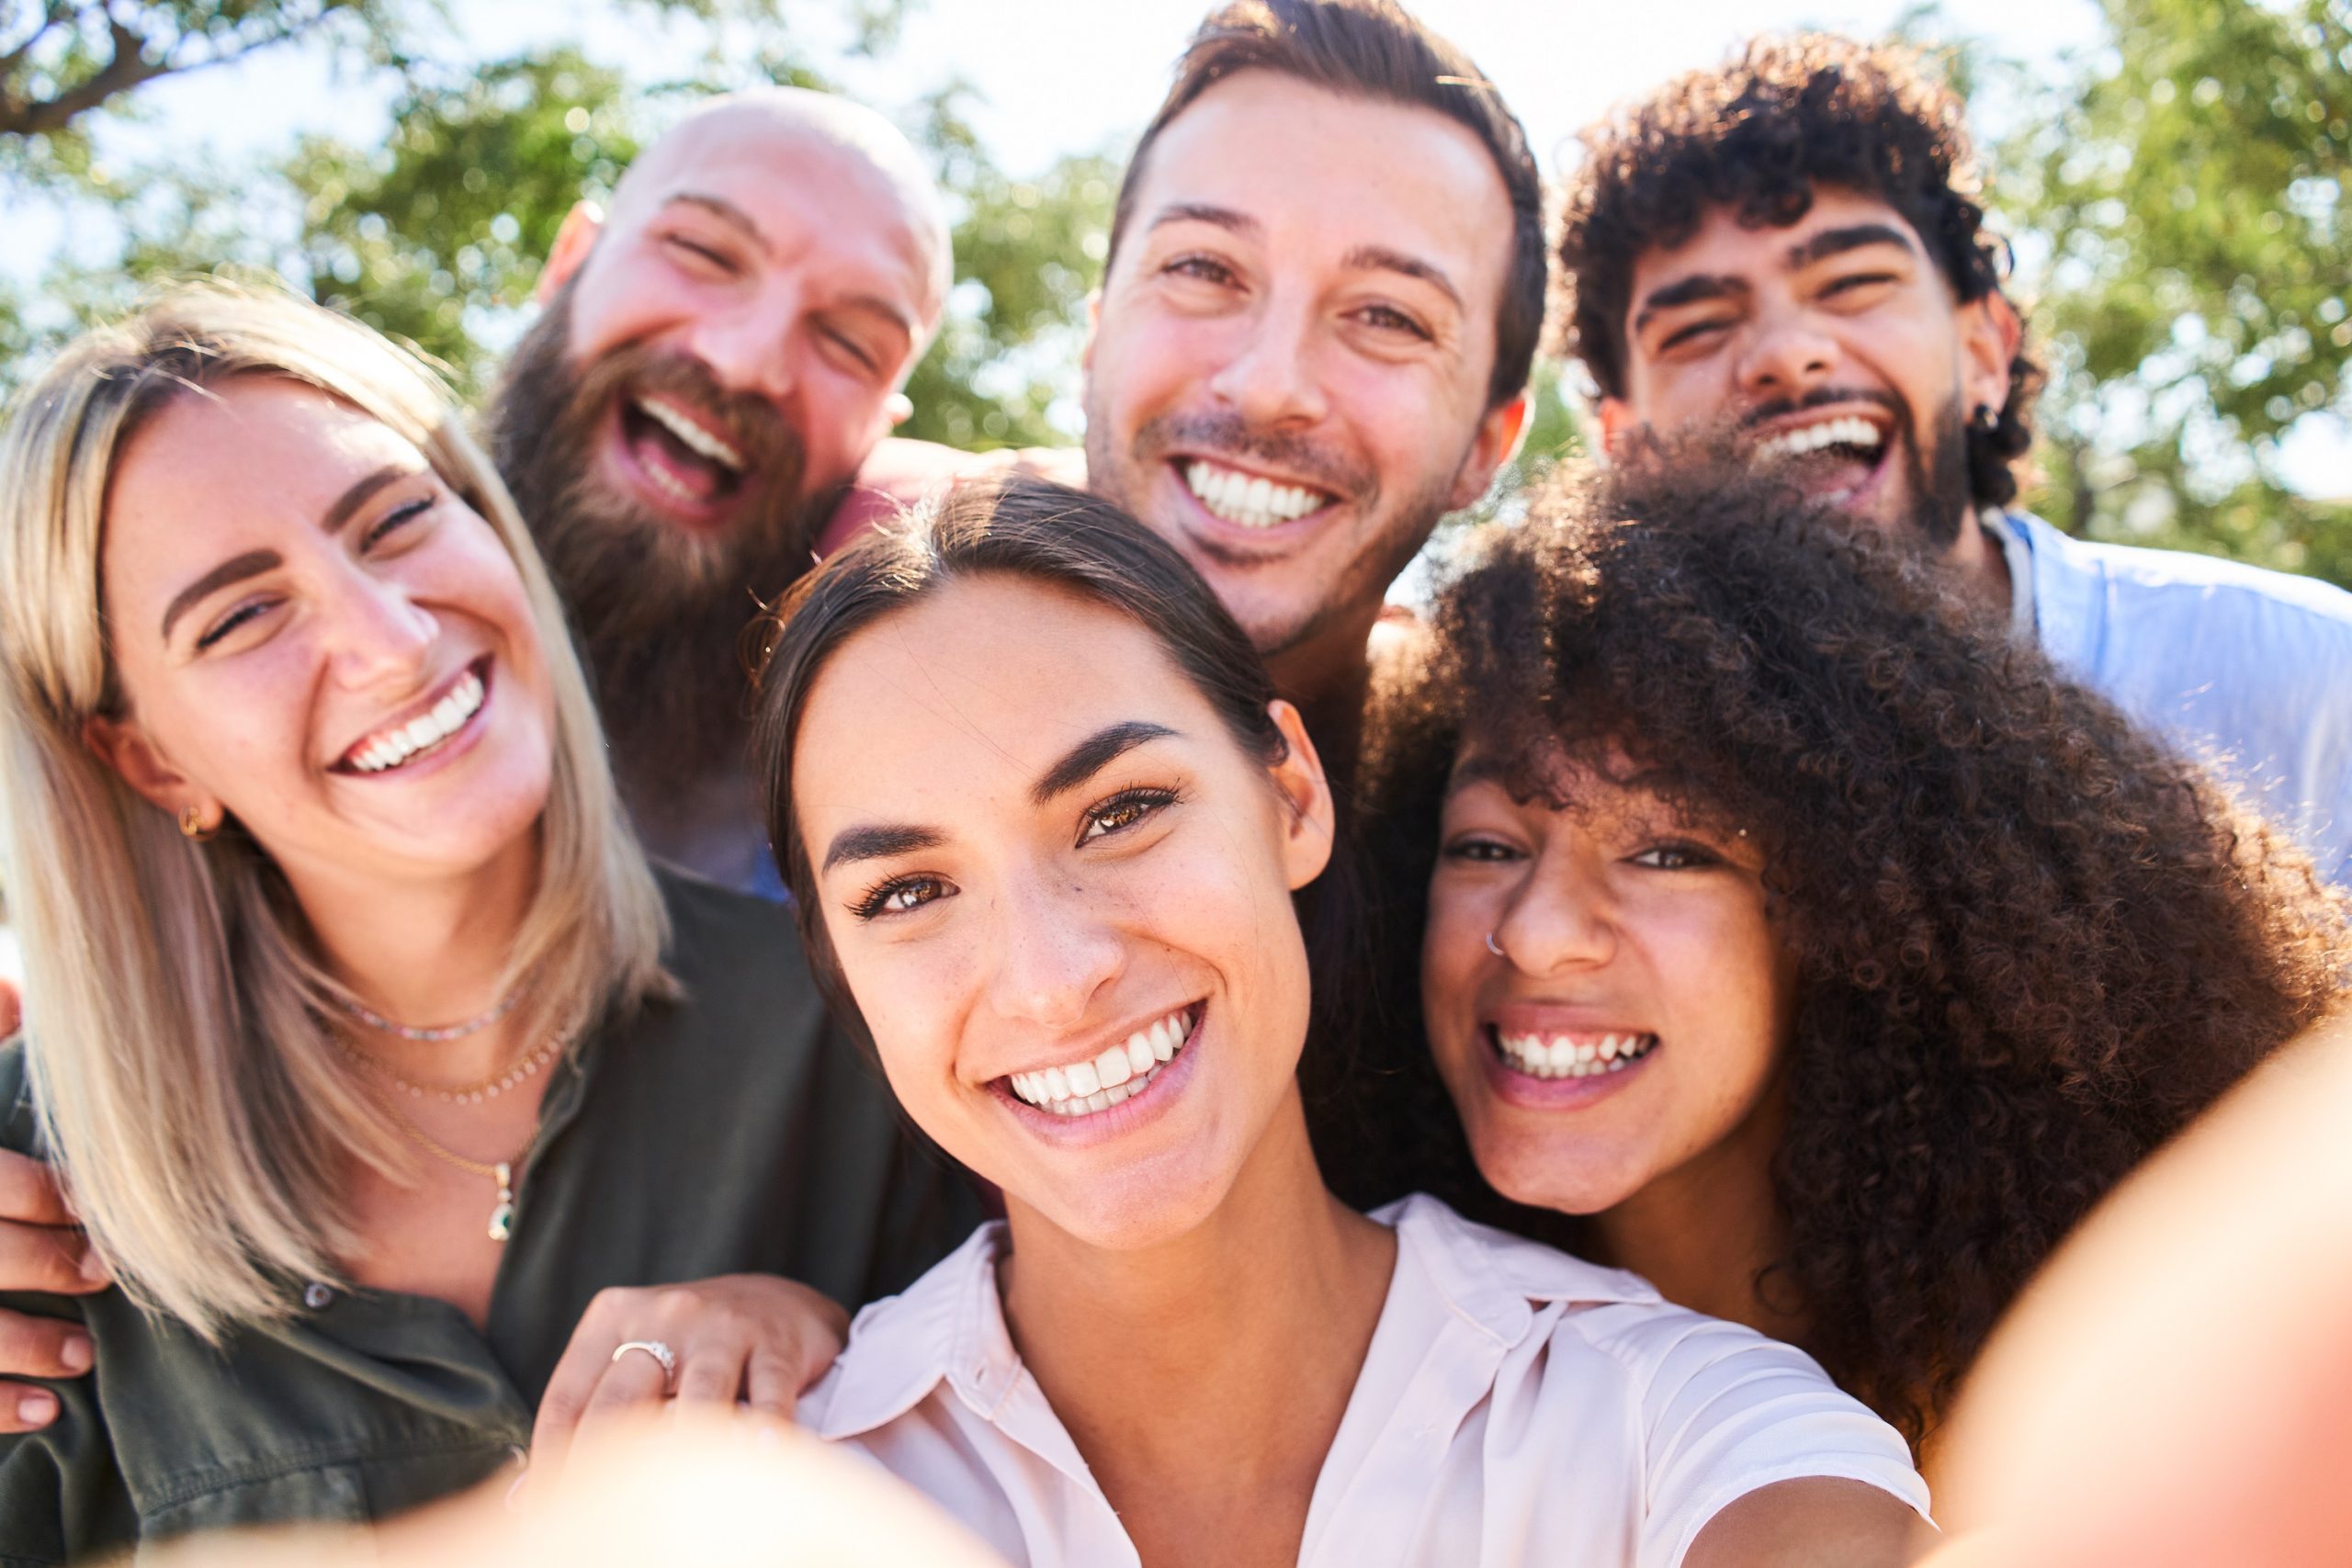 Multiracial people taking selfie outdoors - Happy life style concept with young smiling friends having fun together.